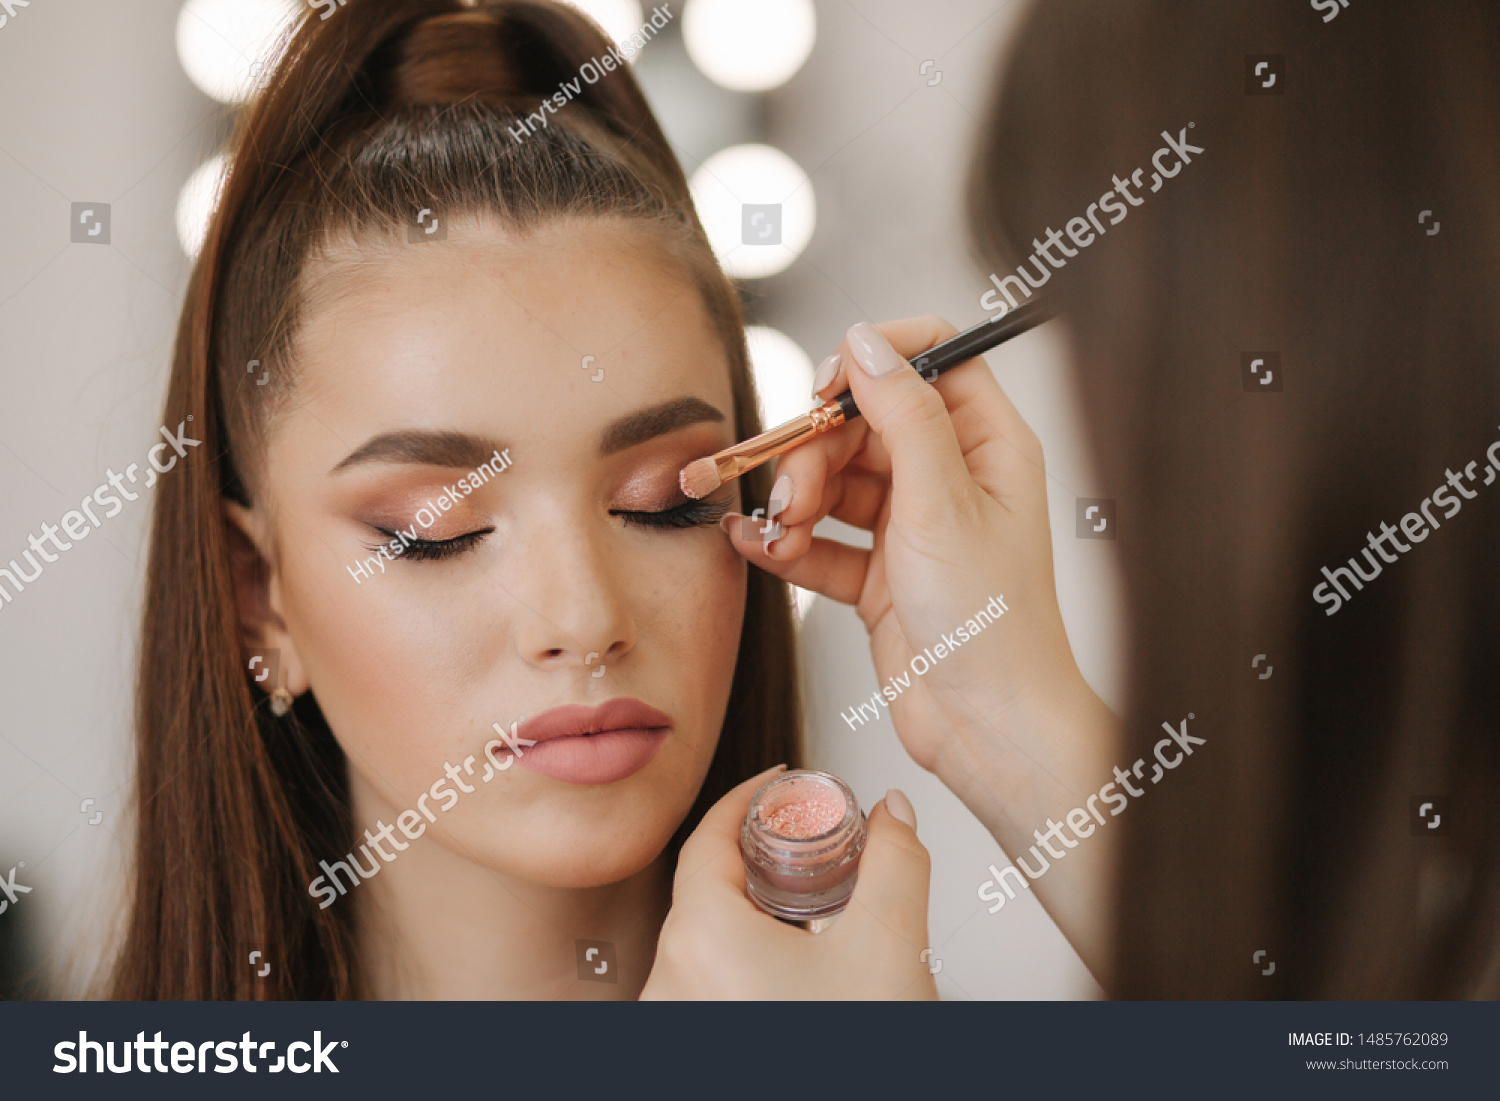 Makeup artist applies eye shadow, perfect evening makeup. Beauty redhead girl with perfect skin and freckles #1485762089